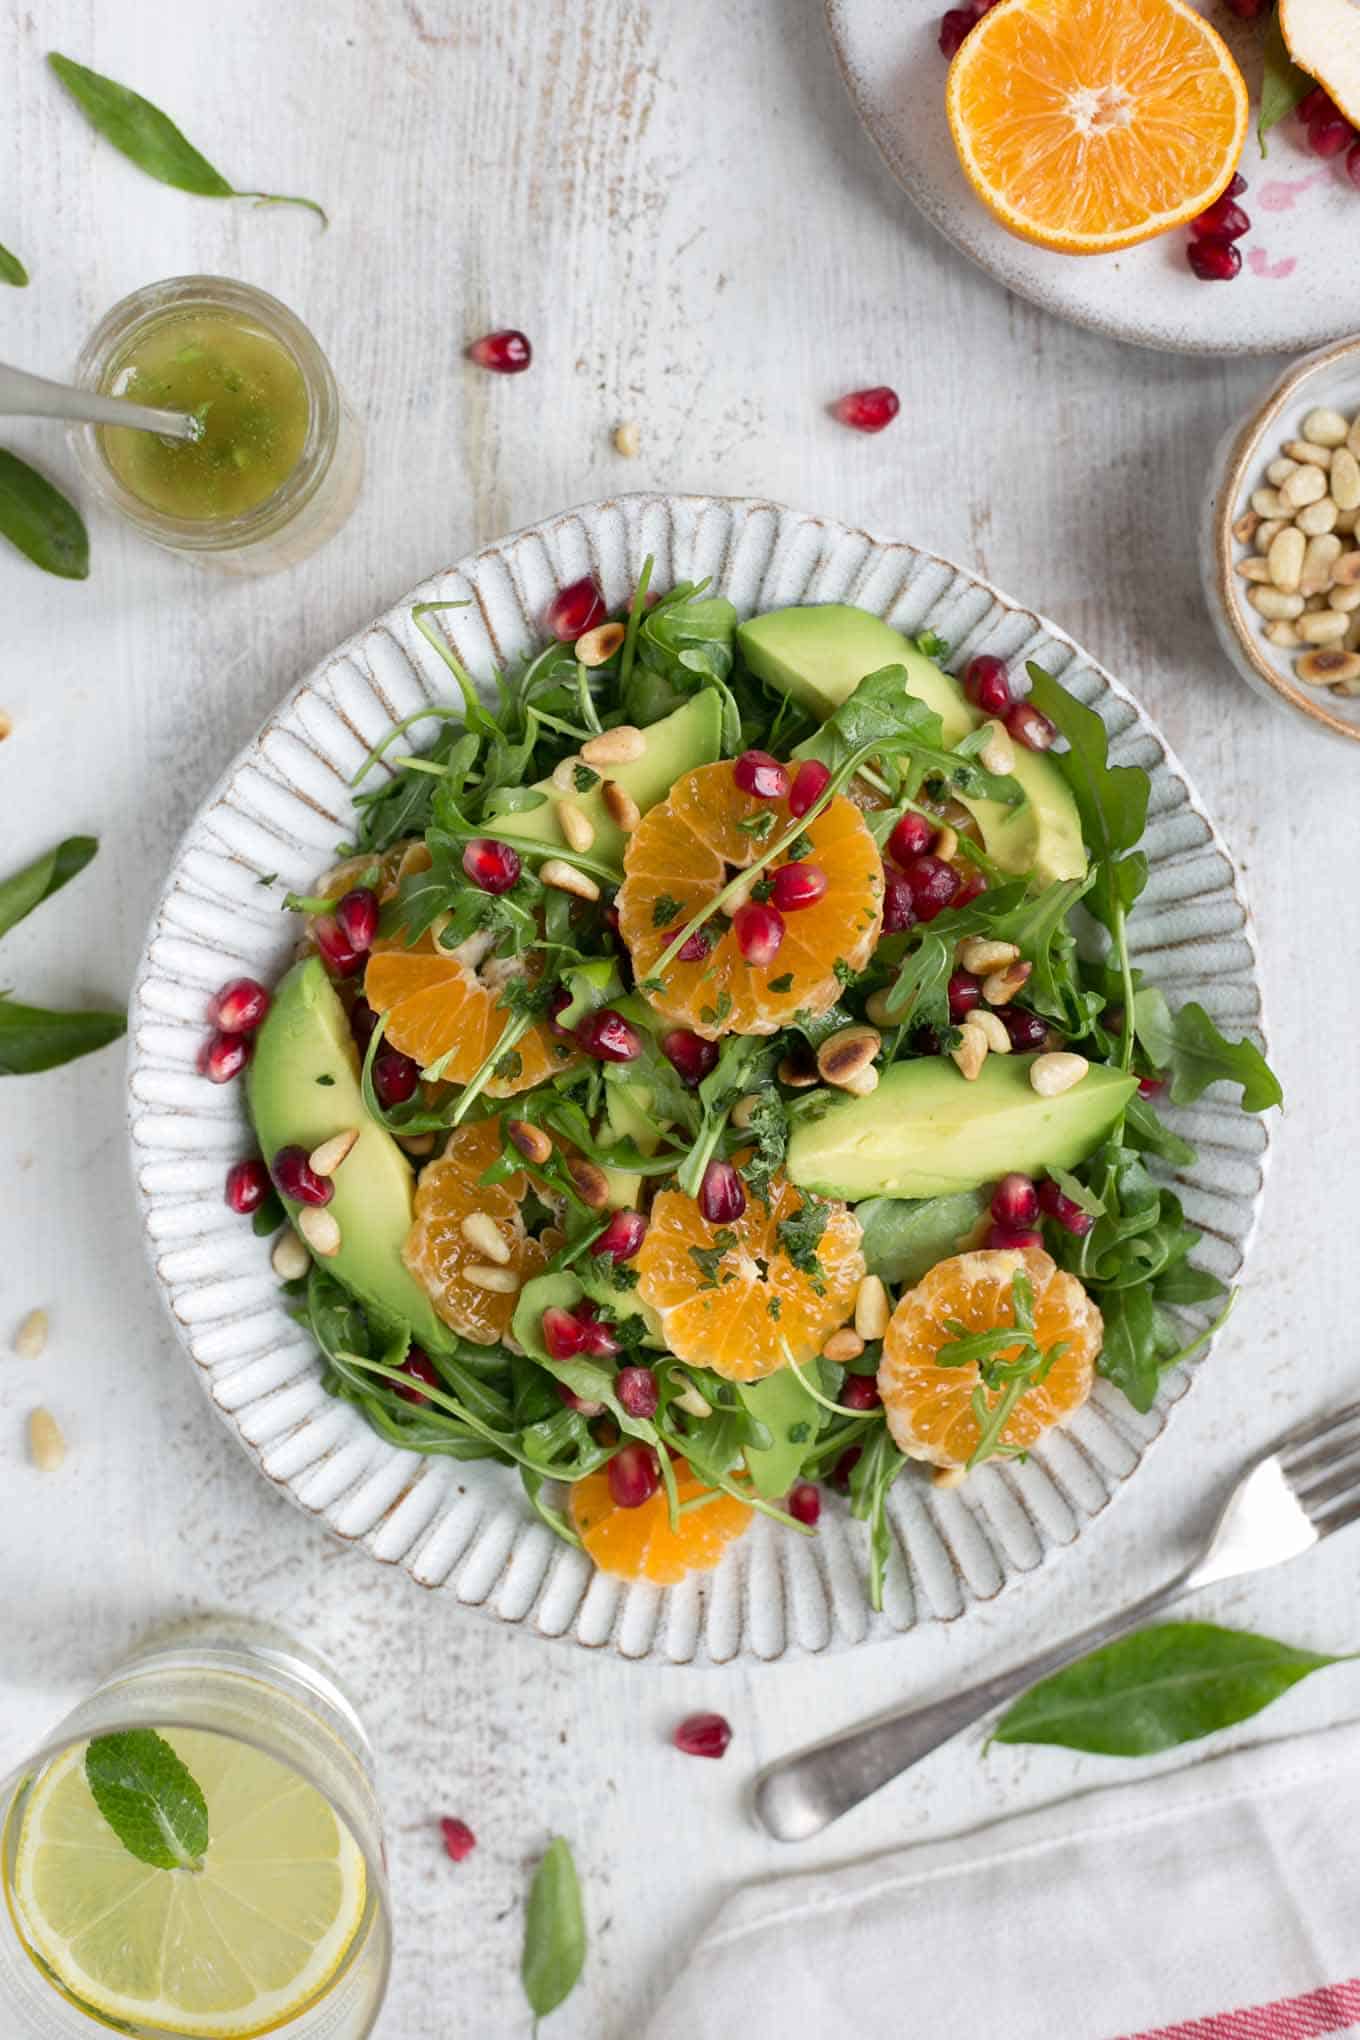 Refreshing clementine salad with avocado and pomegranate, drizzled with tangy dressing #vegan #salad #clementine | via @annabanana.co